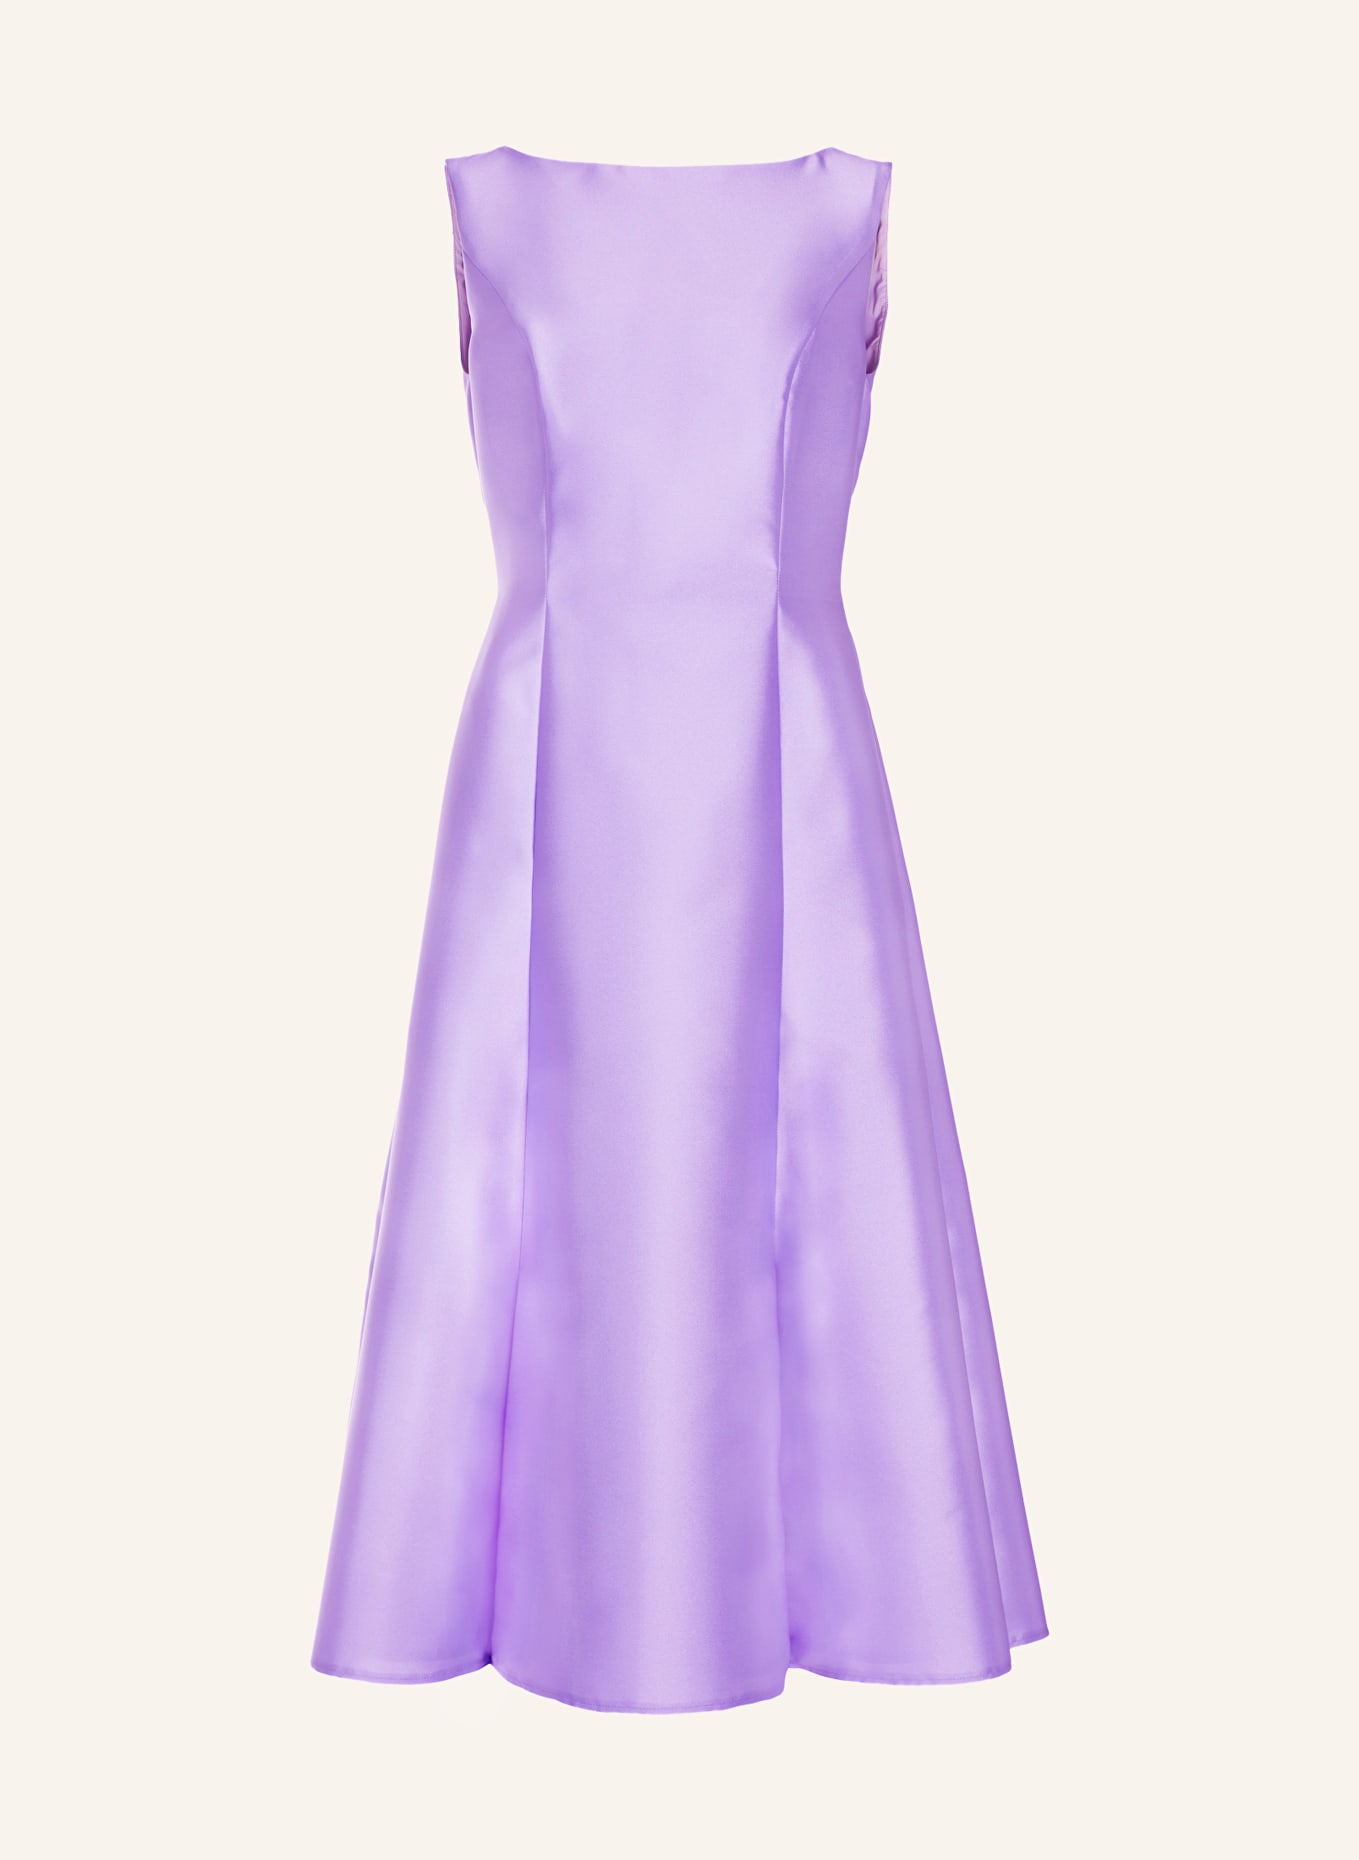 SWING Cocktail dress made of satin, Color: PURPLE (Image 1)